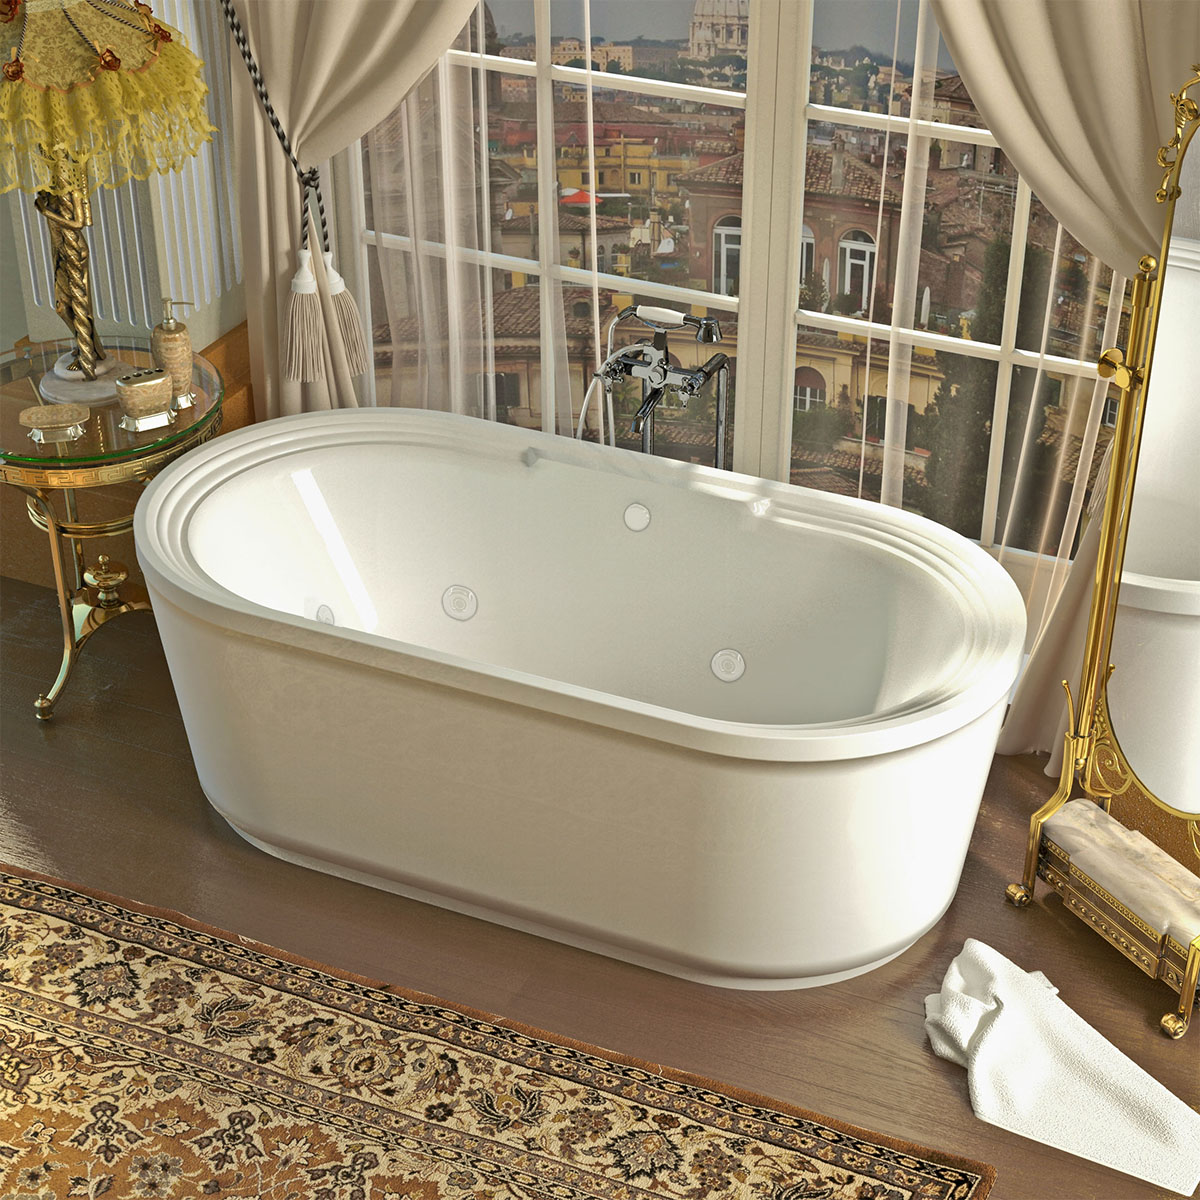 Padre 34 x 67 x 21 in. Oval Air & Whirlpool Water Jetted Bathtub